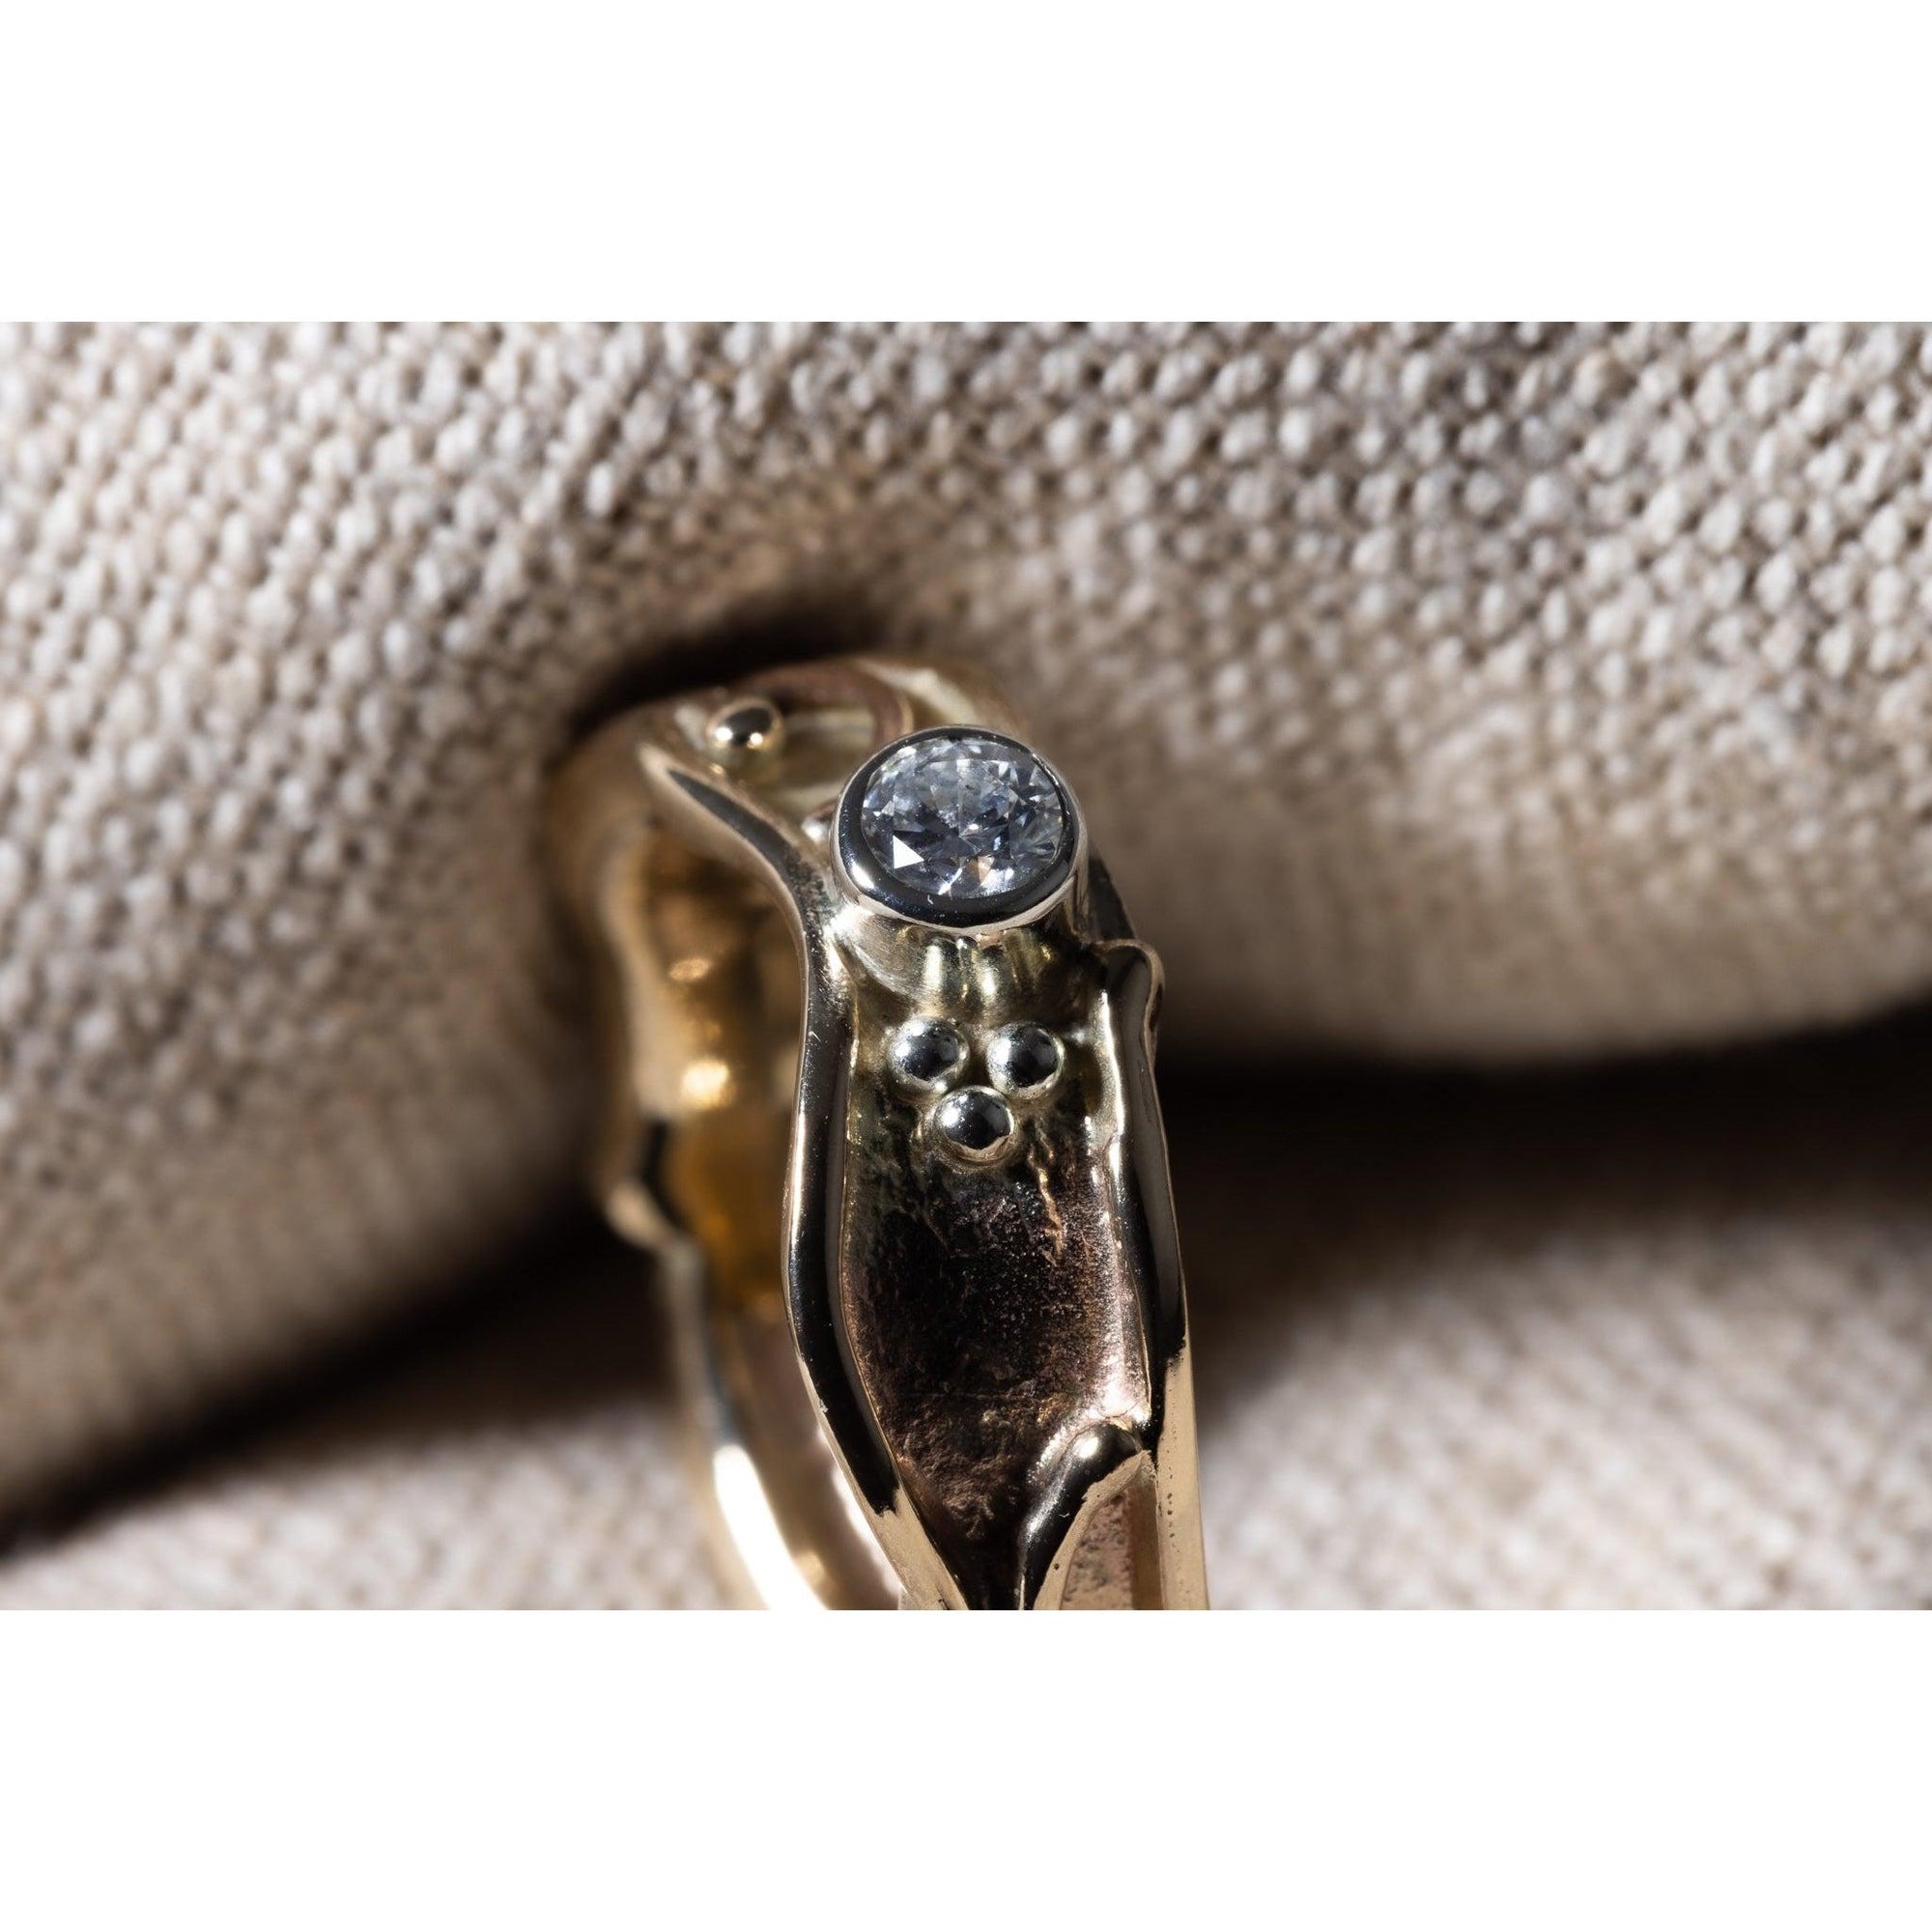 'LG25 9ct Gold & Diamond Ring' by Les Grimshaw, available at Padstow Gallery, Cornwall